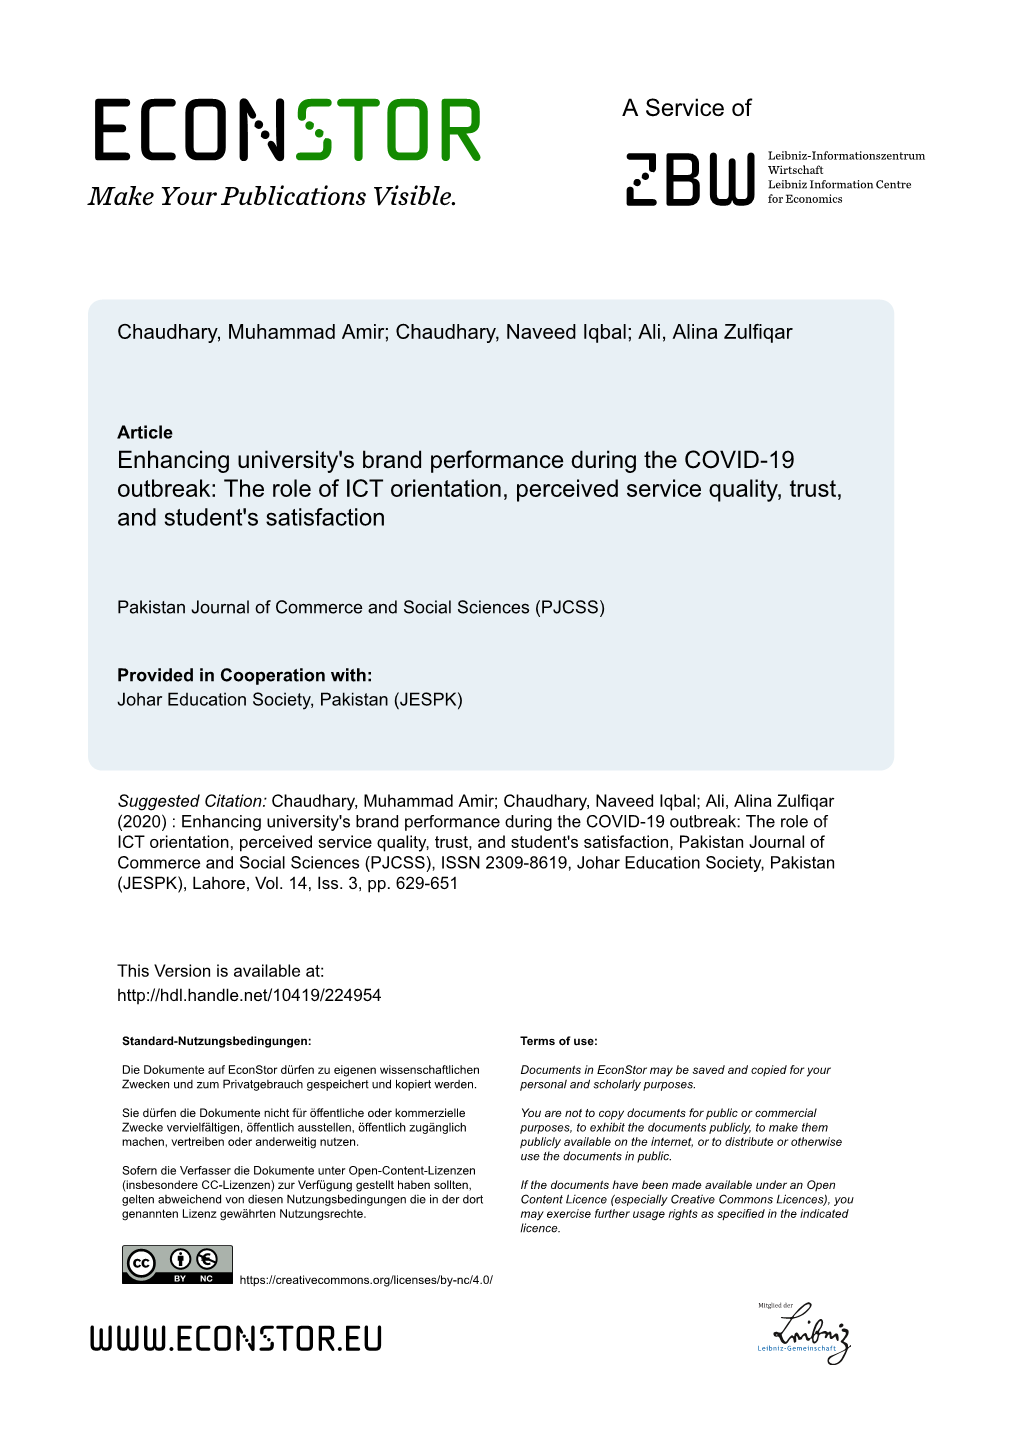 Enhancing University's Brand Performance During the COVID-19 Outbreak: the Role of ICT Orientation, Perceived Service Quality, Trust, and Student's Satisfaction